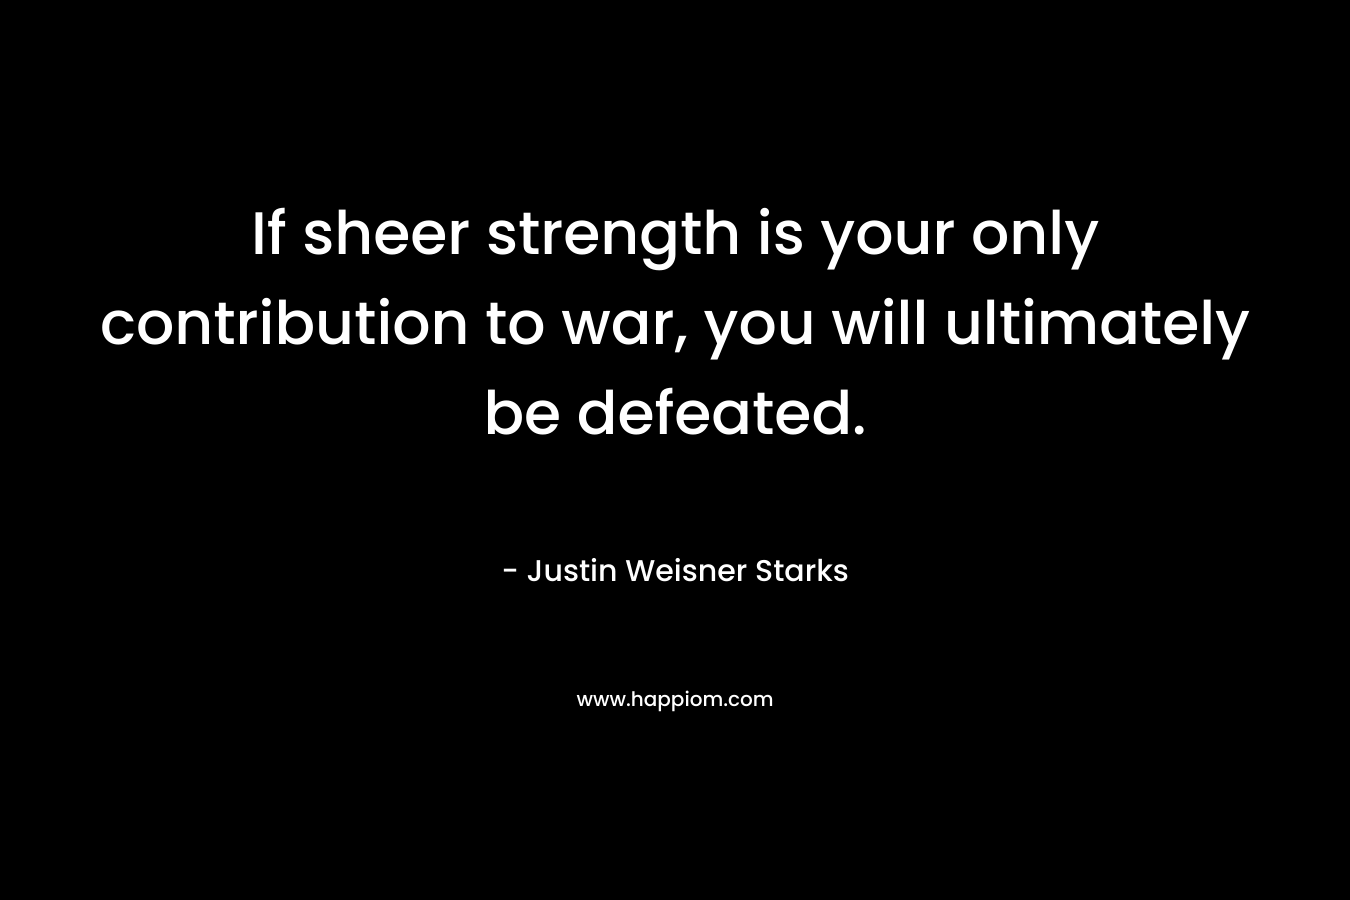 If sheer strength is your only contribution to war, you will ultimately be defeated.